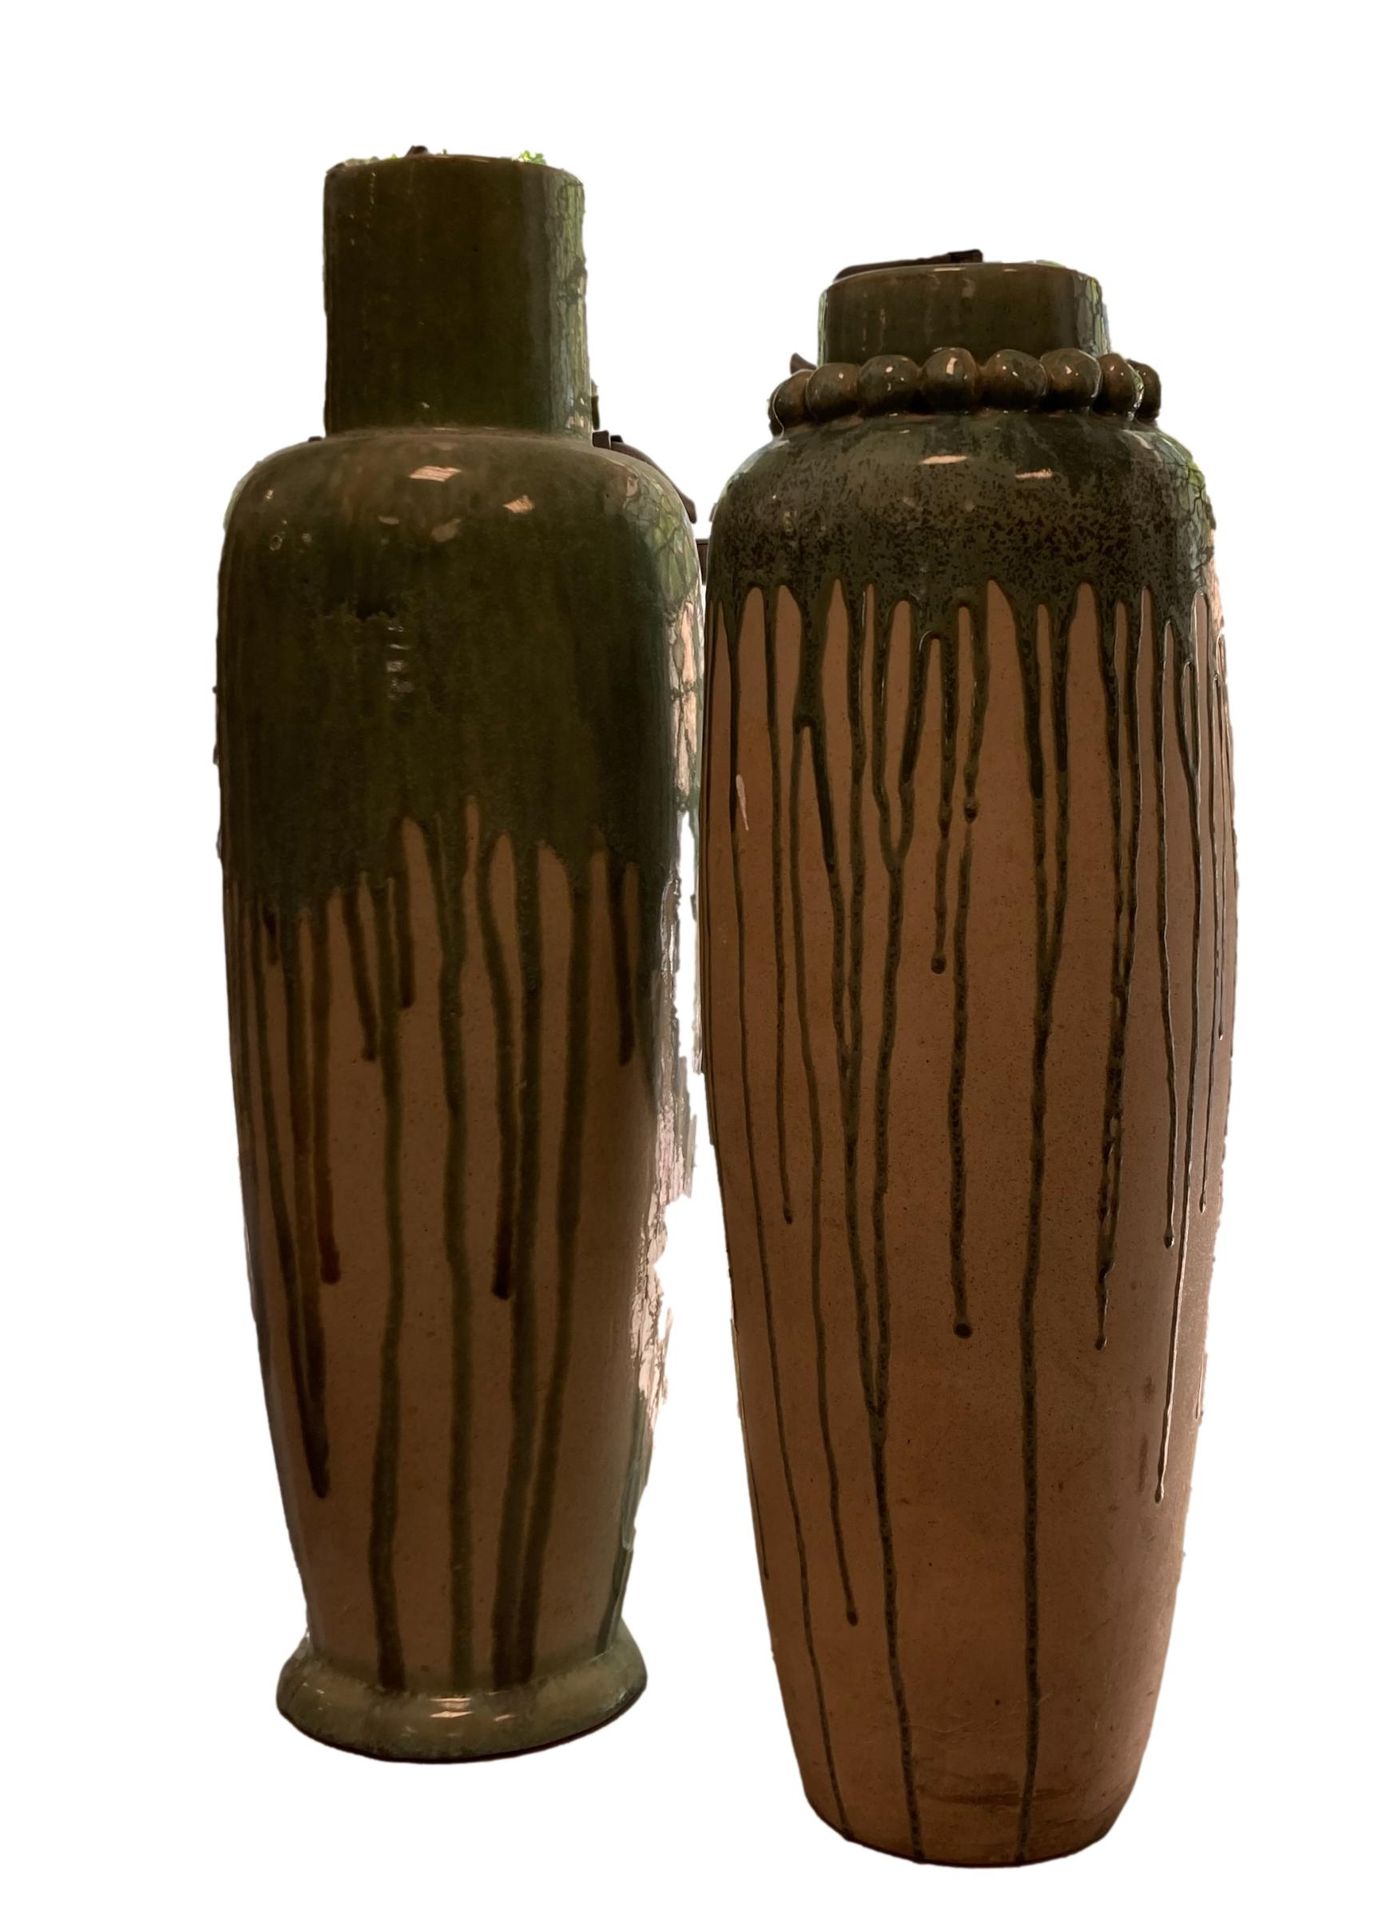 Null ROYAL HICKMAN

Suite of two glazed ceramic vases with green drips and appli&hellip;